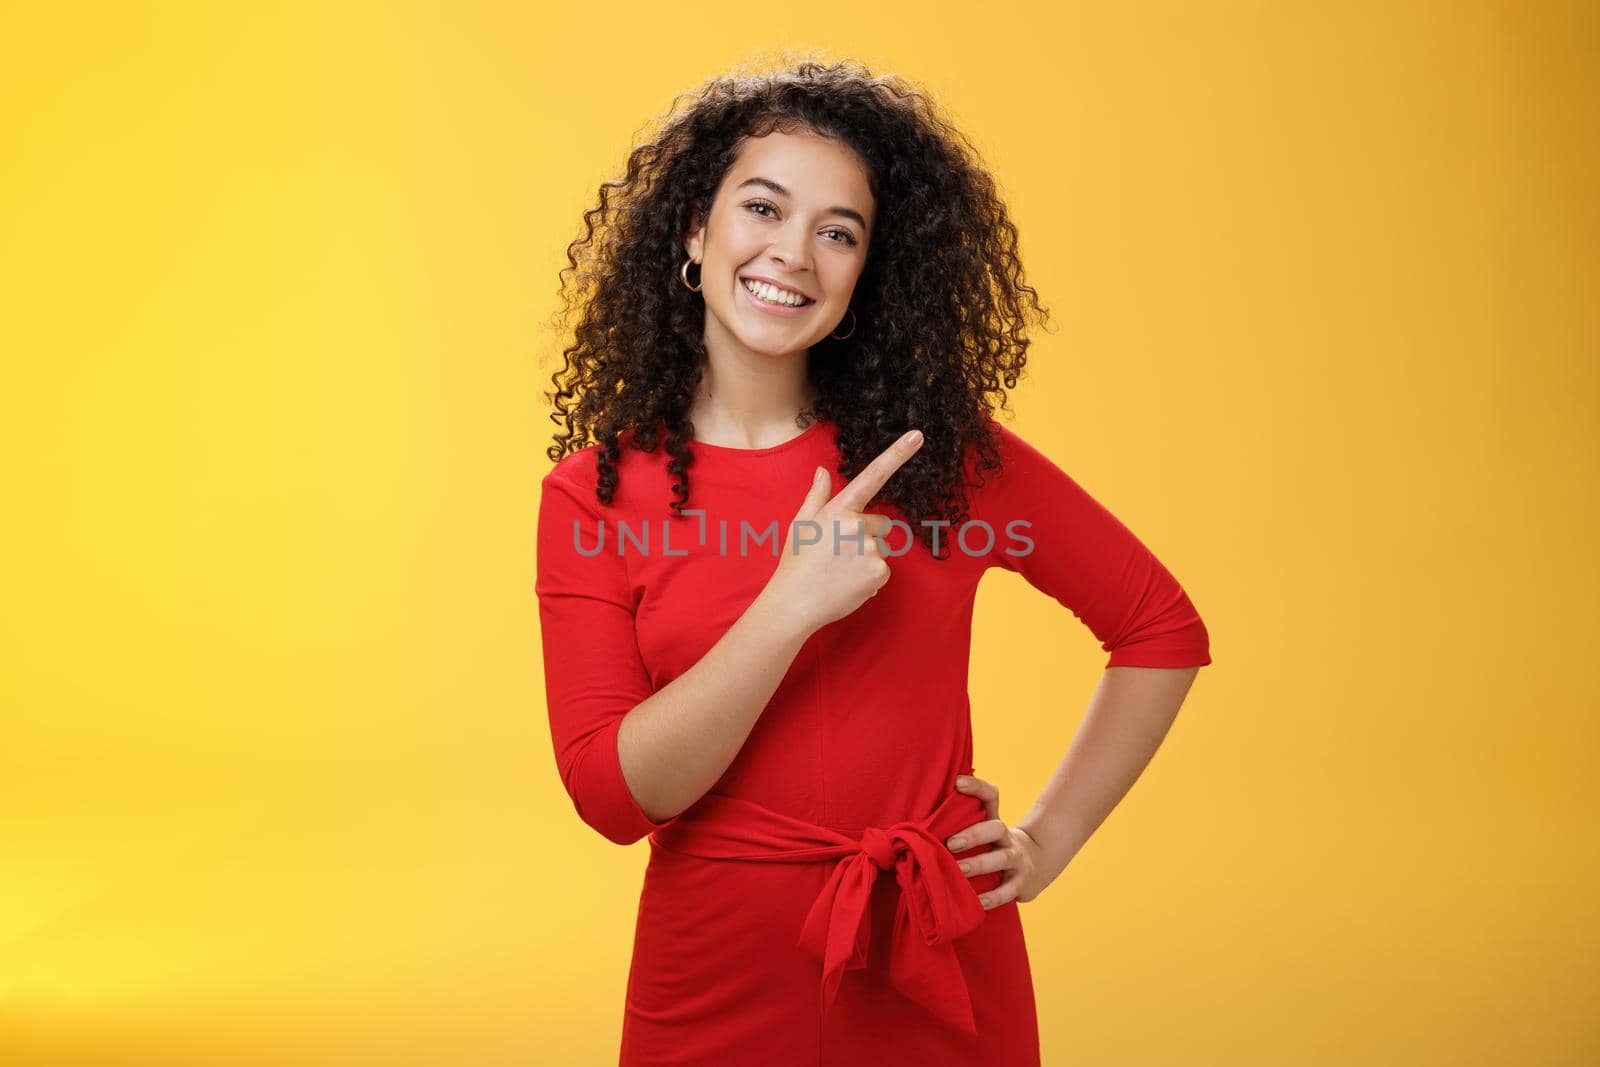 Girl suggesting try out new product. Friendly and pleasant happy young european brunette with curly hair tilting head cute, smiling broadly, pointing at upper right corner to direct at advertisement.